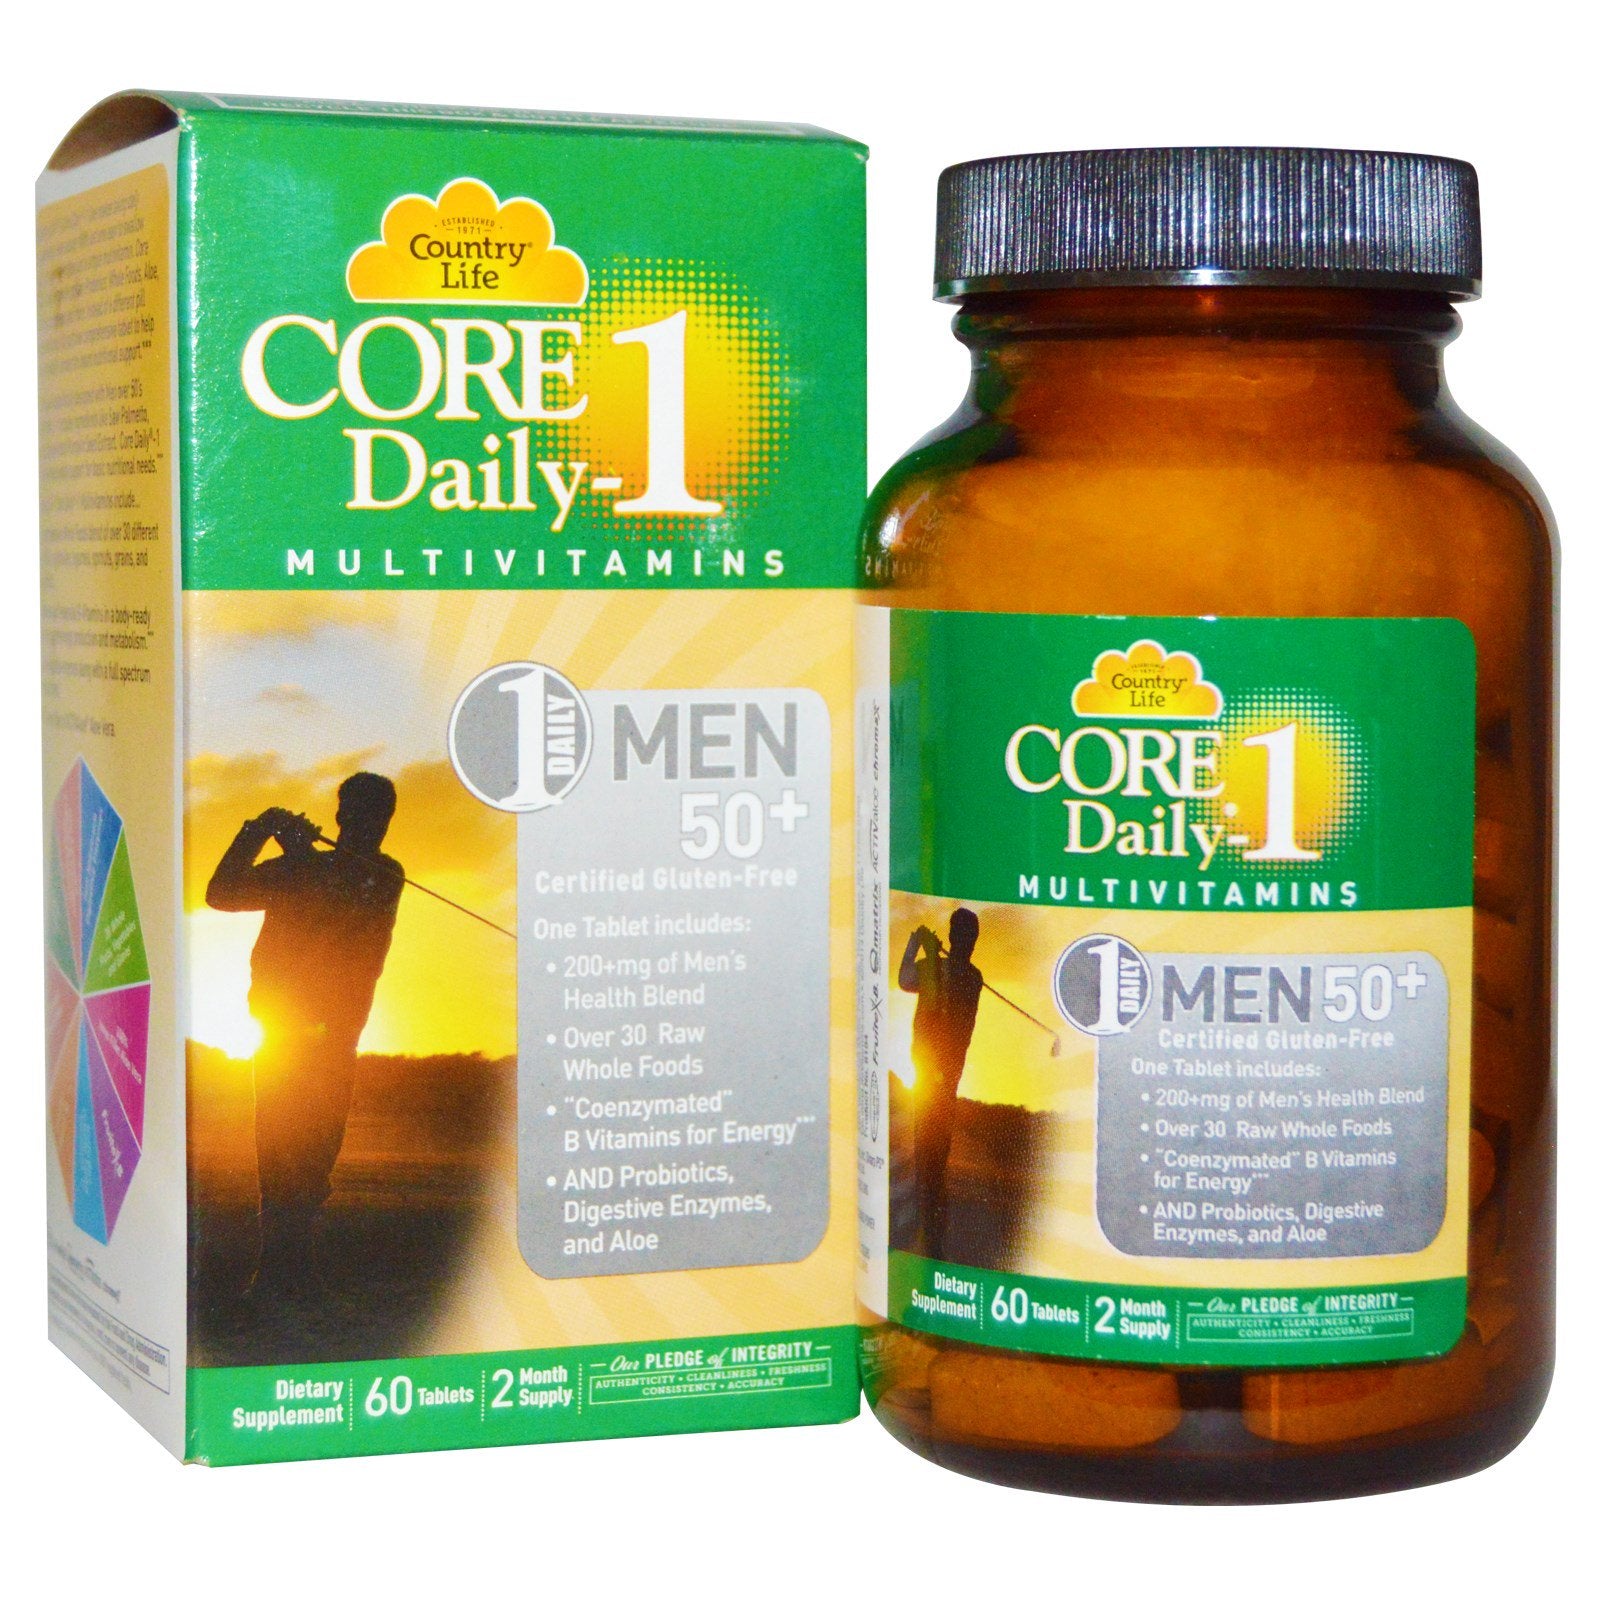 Country Life, Core Daily-1 Multivitamins, Men 50+, 60 Tablets